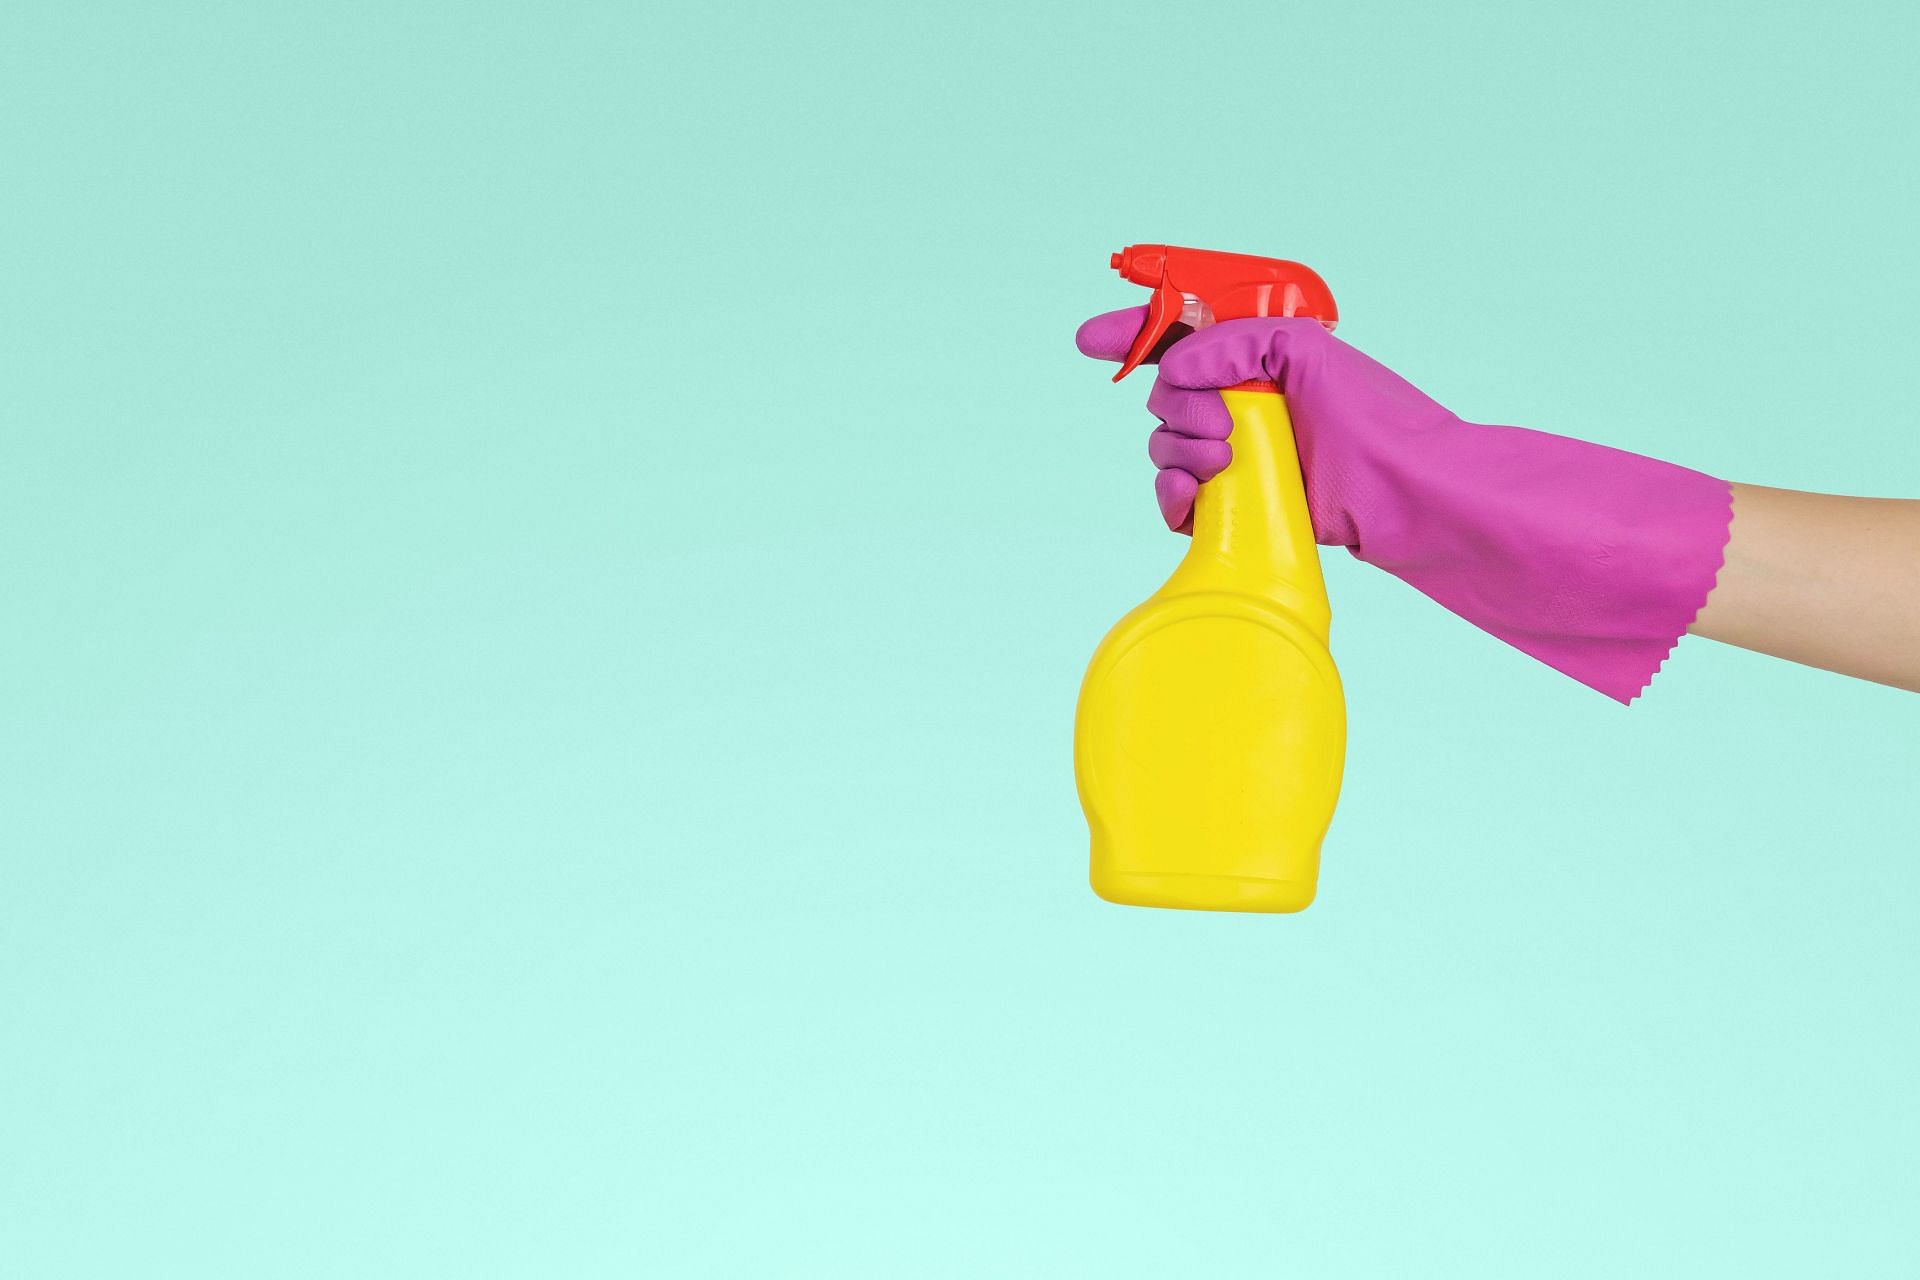 Using cleaning products at home can cause lot of harm to your health (Image via Unsplash / Jeshoots)